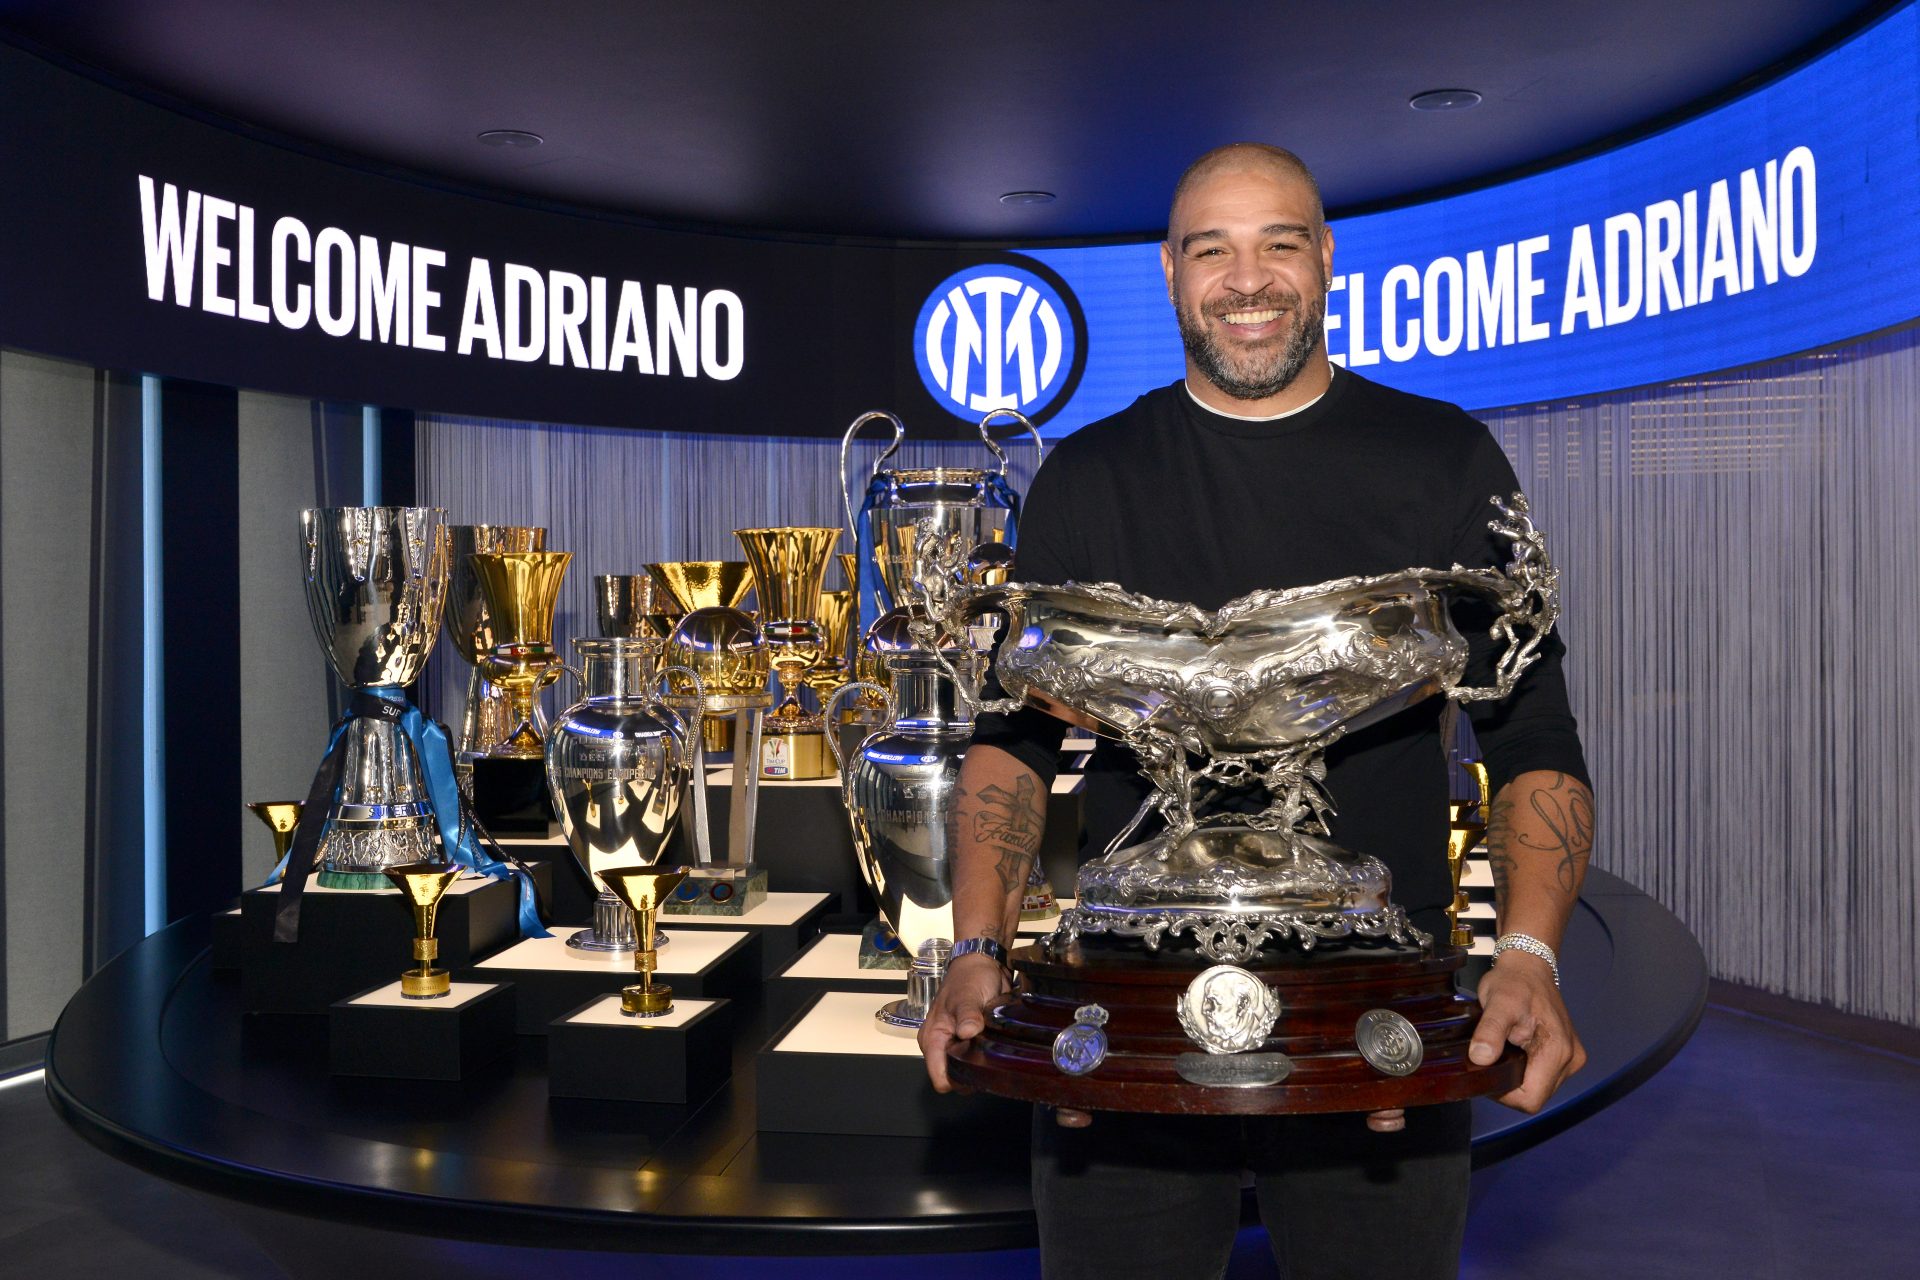 <p><span>In addition to his success in Serie A, Adriano also won the Italian Cup three times with Inter Milan, in 2005, 2006 and 2010, as well as the Italian Supercup in 2005 and 2006.</span></p>